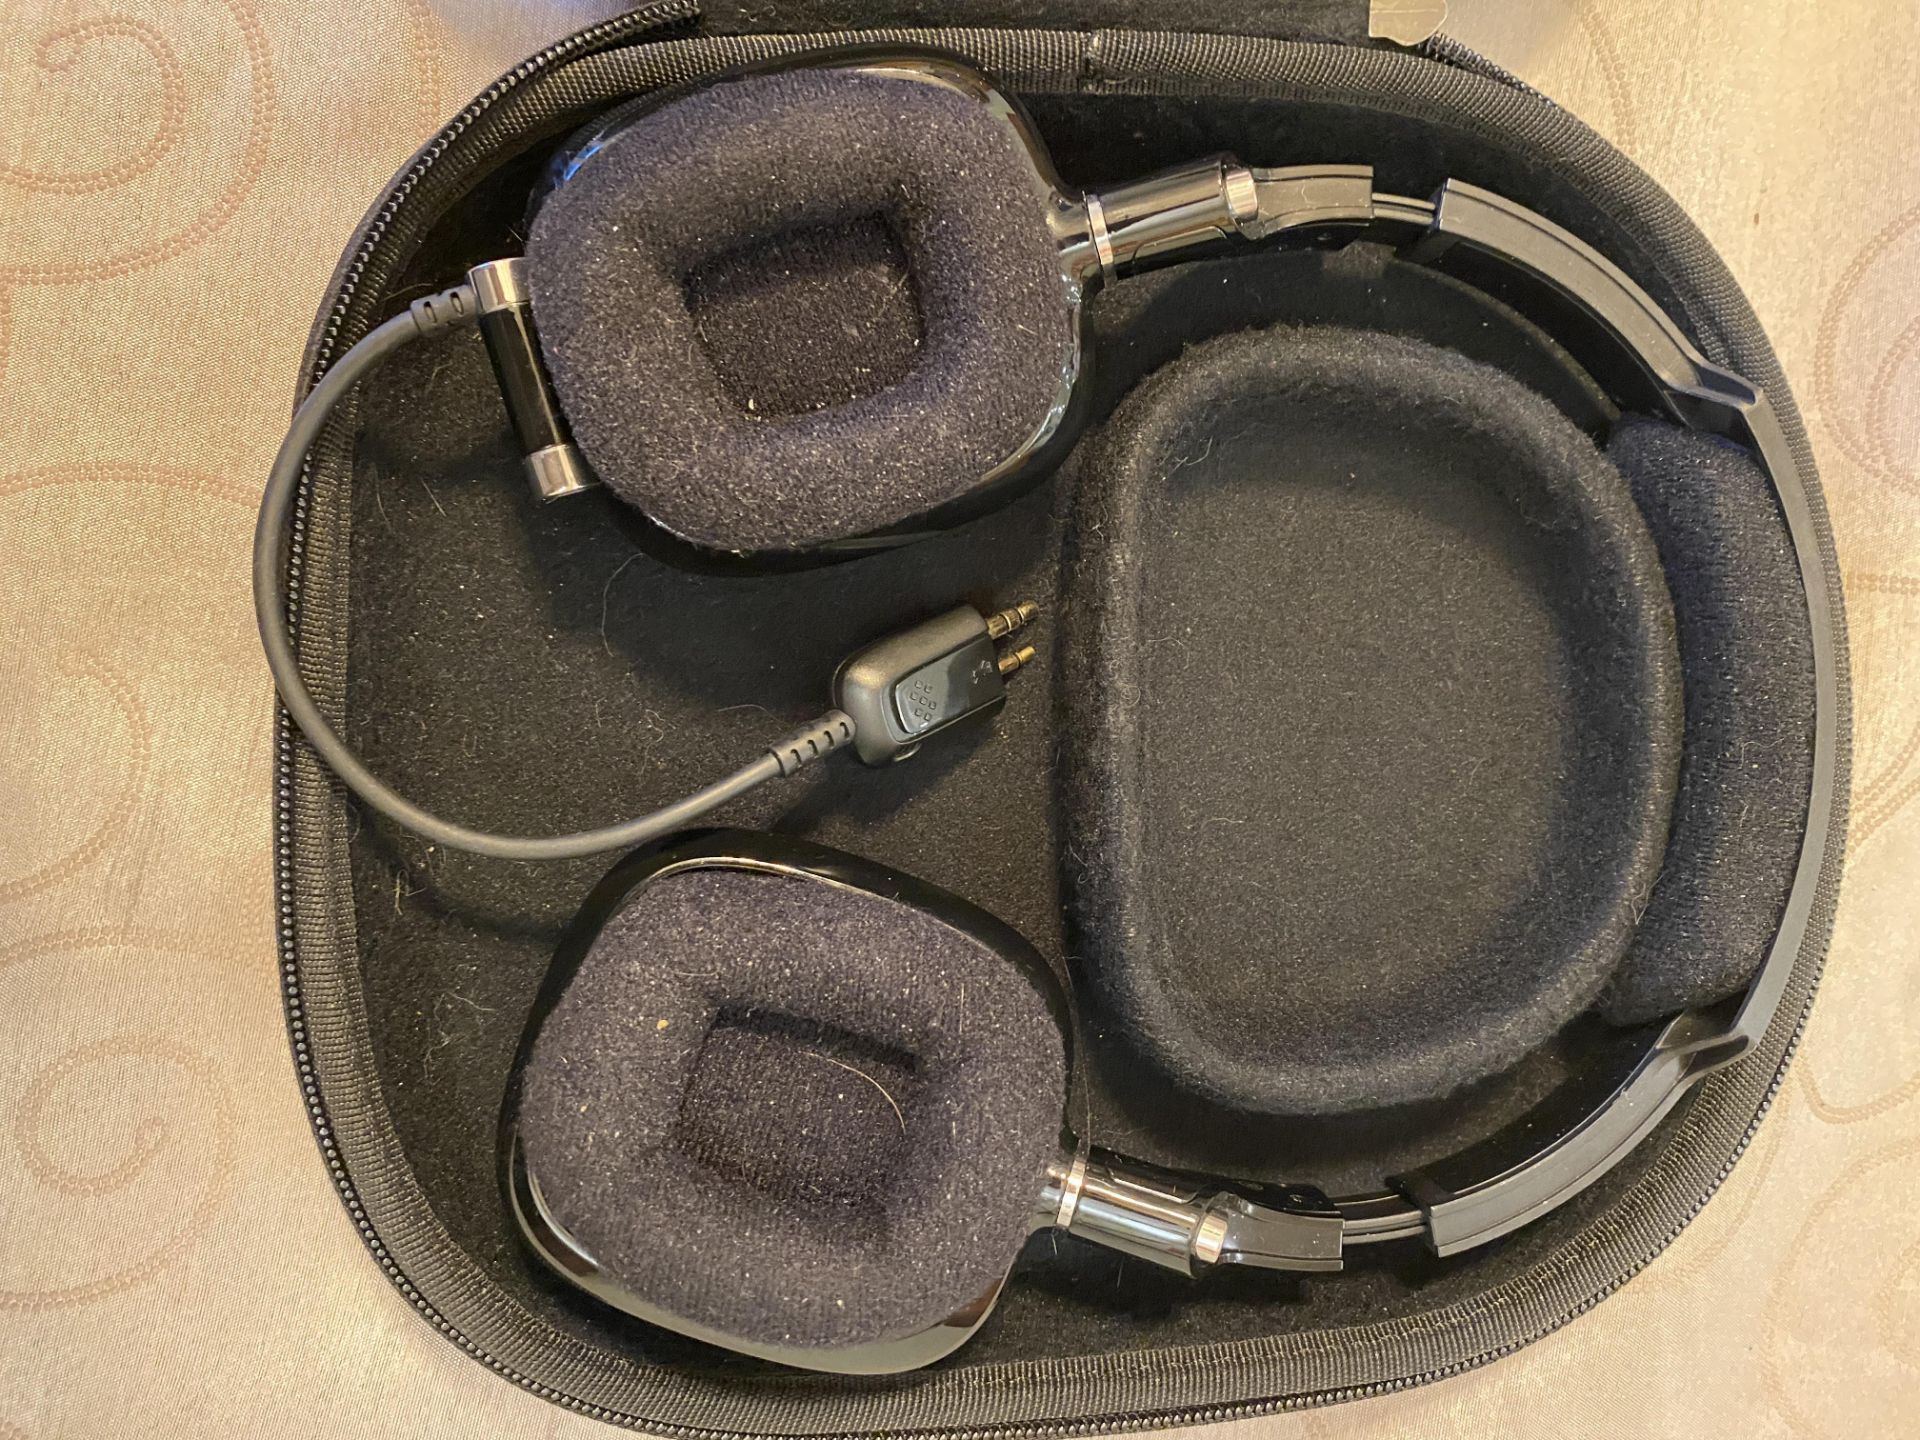 Astro A30 Headset with Carry Case and Extra Leads and Adapters As Shown - Image 10 of 10